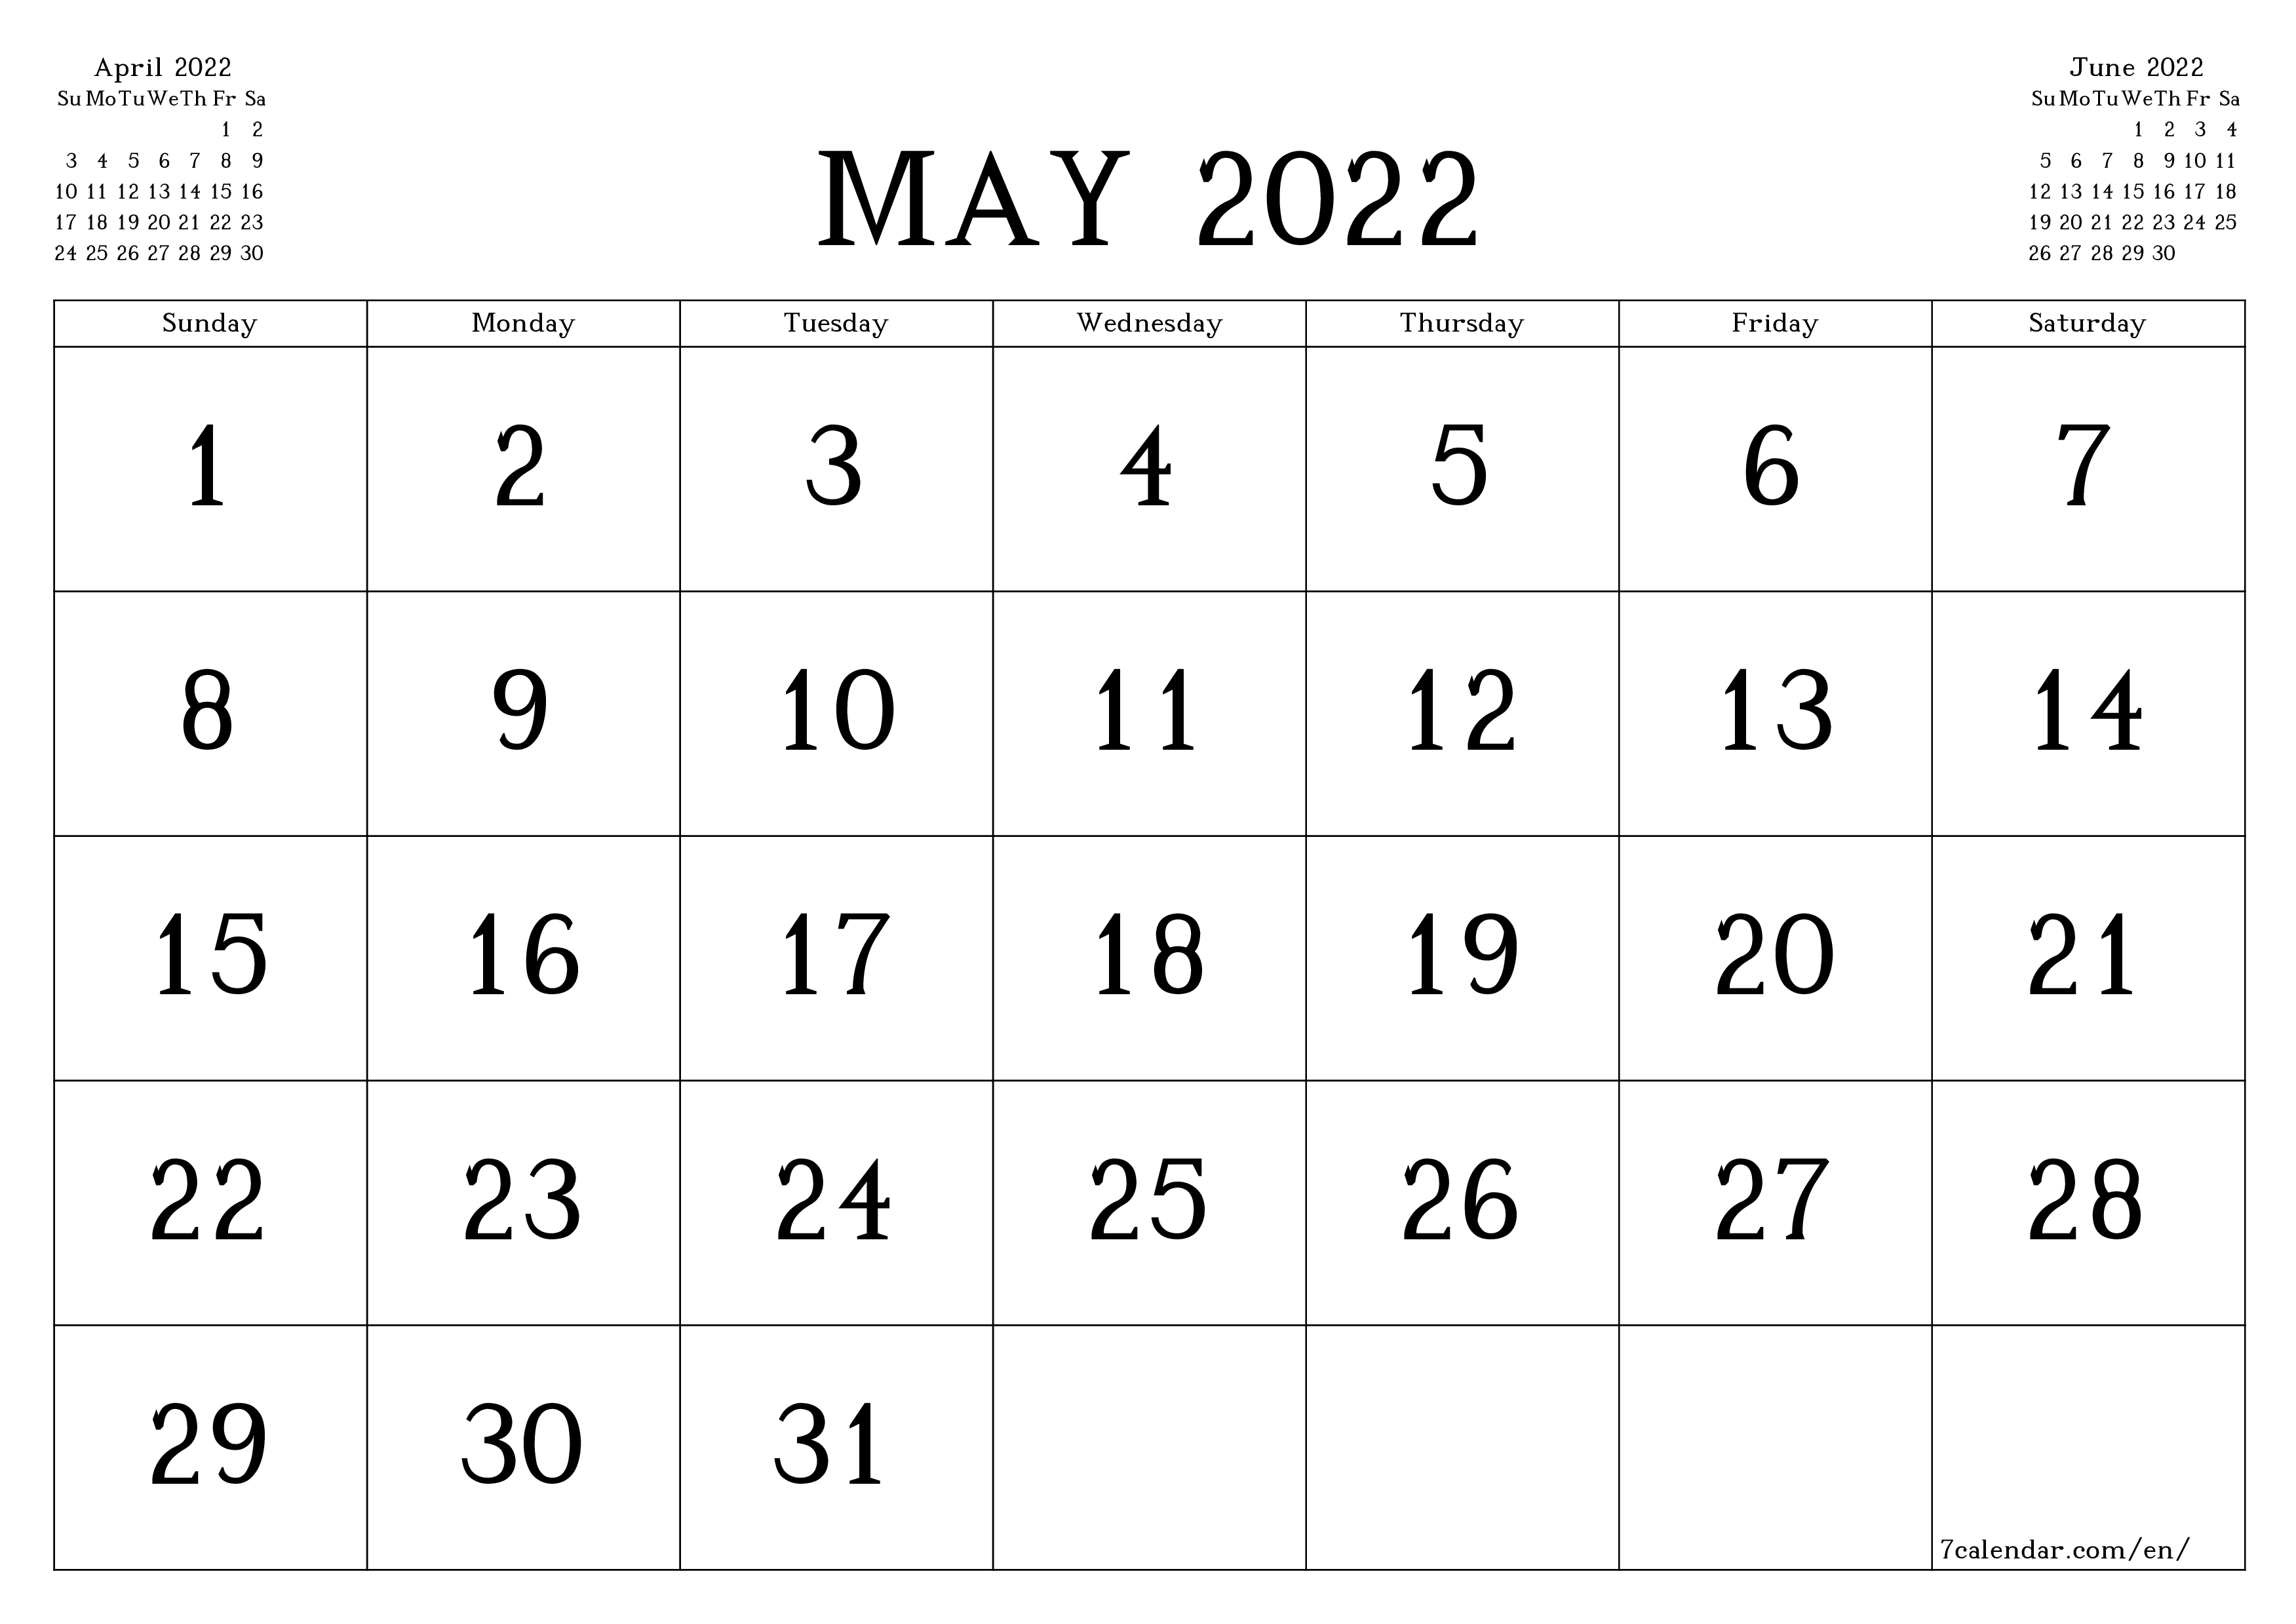 Blank monthly dated HD template image of calendar for month May 2022 save and print to PDF PNG English - 7calendar.com